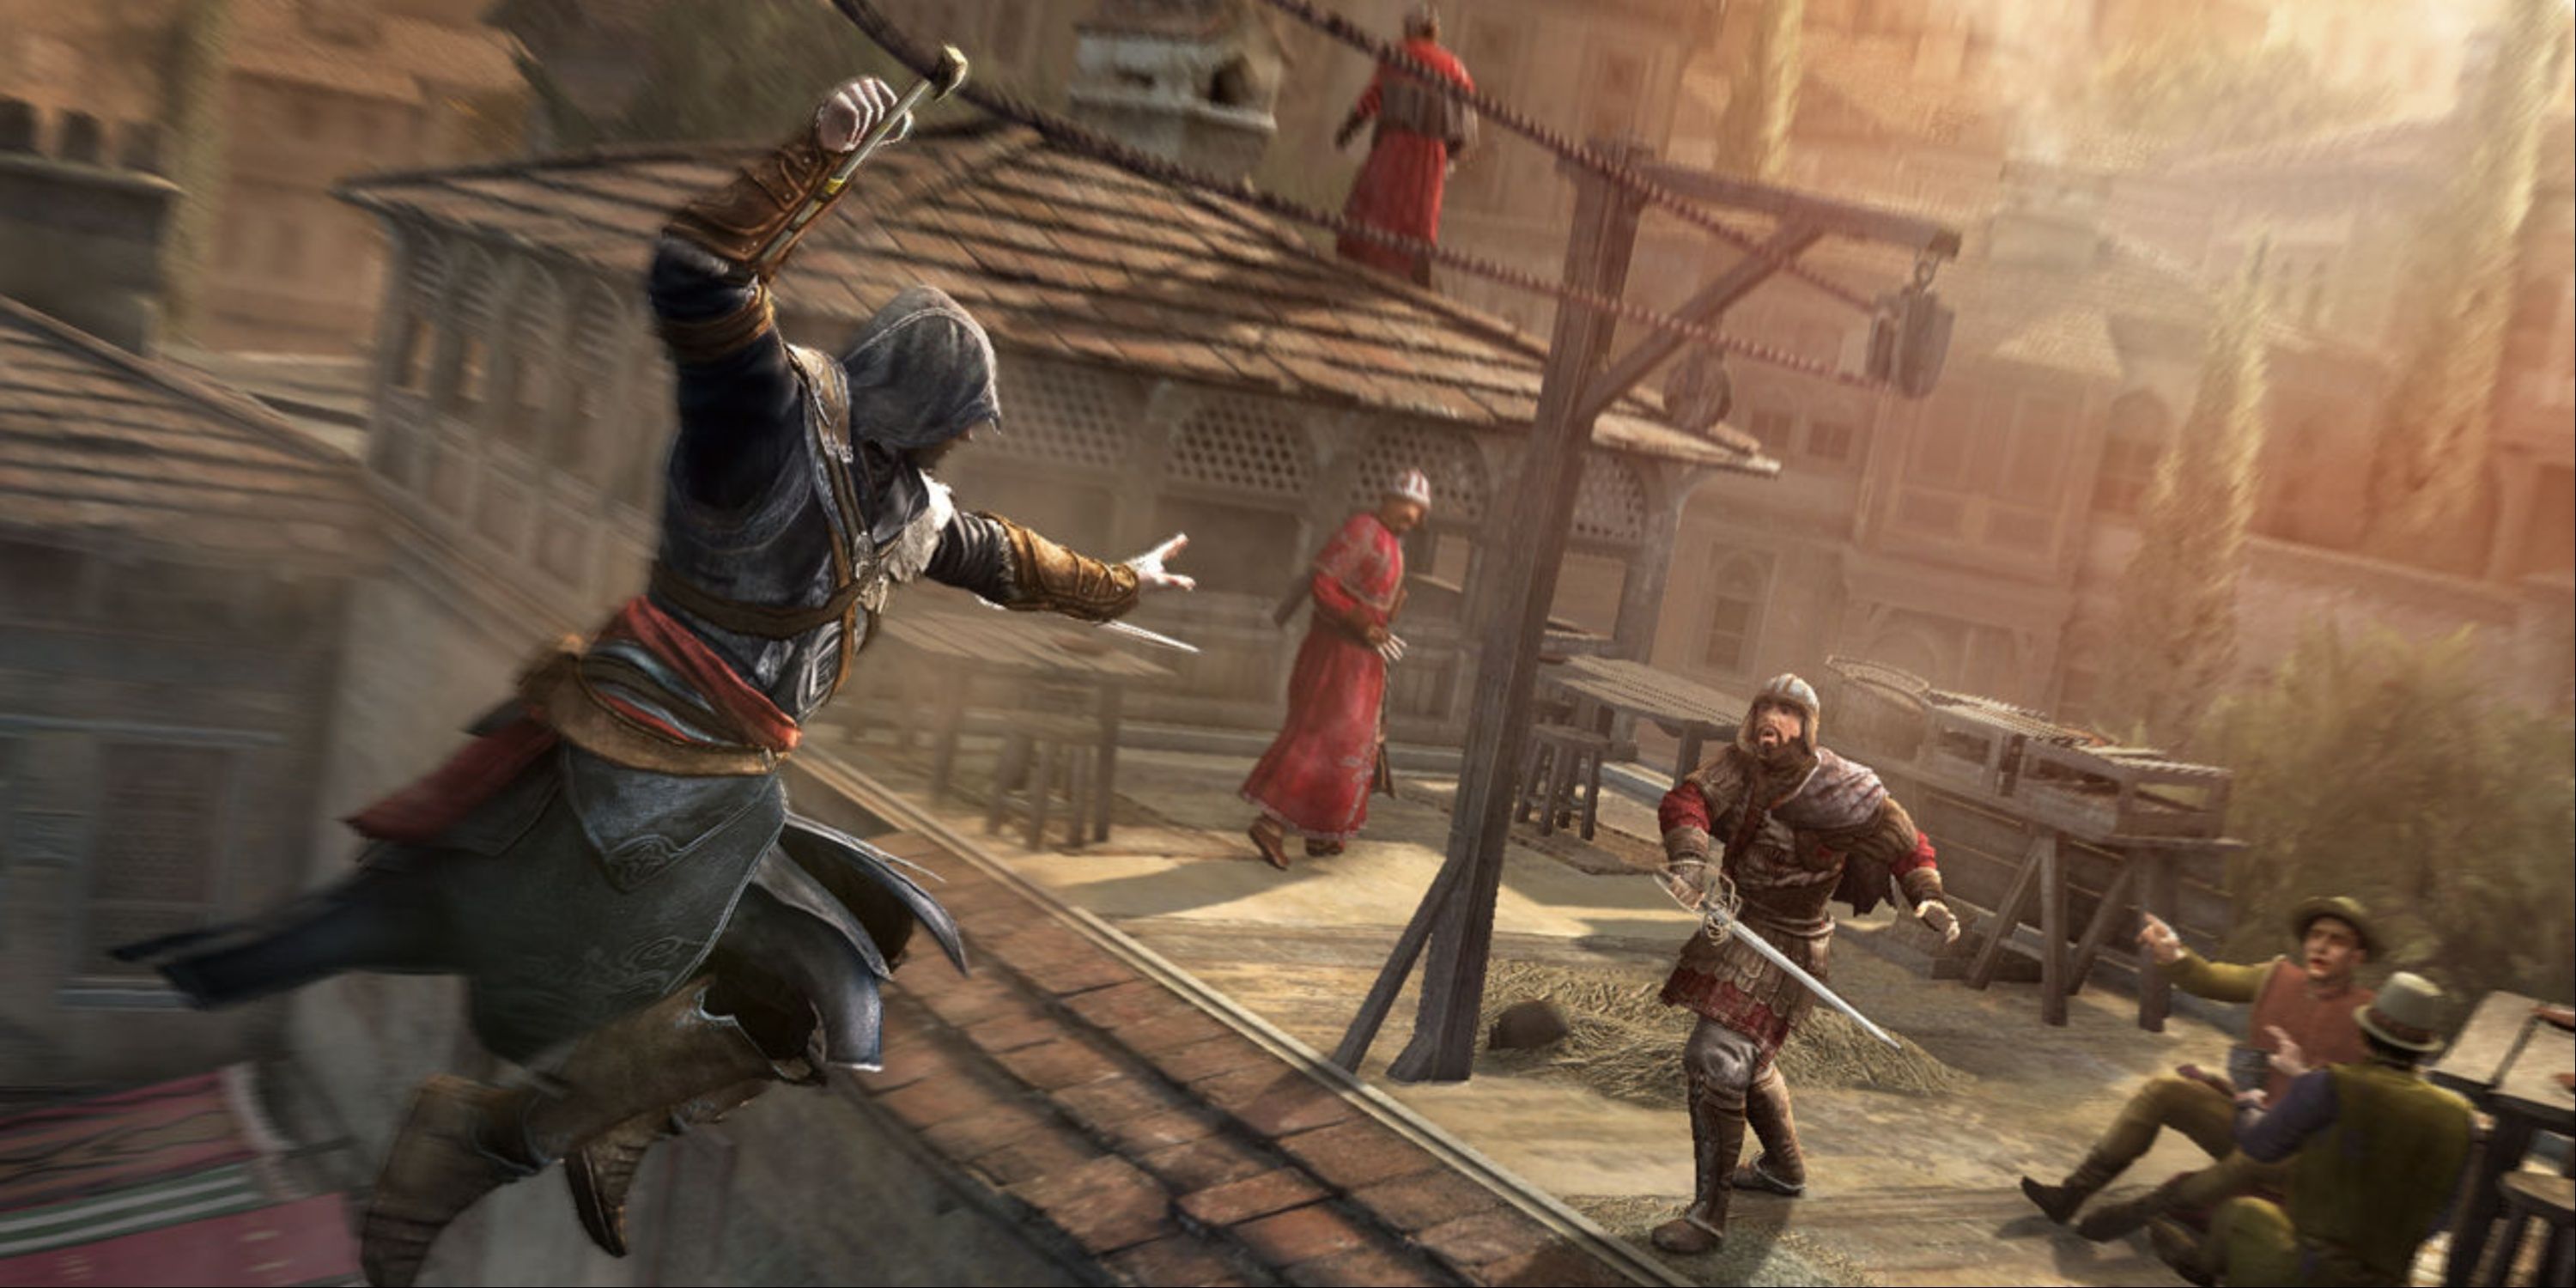 Revelations added just one tool to Ezio's toolbelt that made parkour feel fresh again.